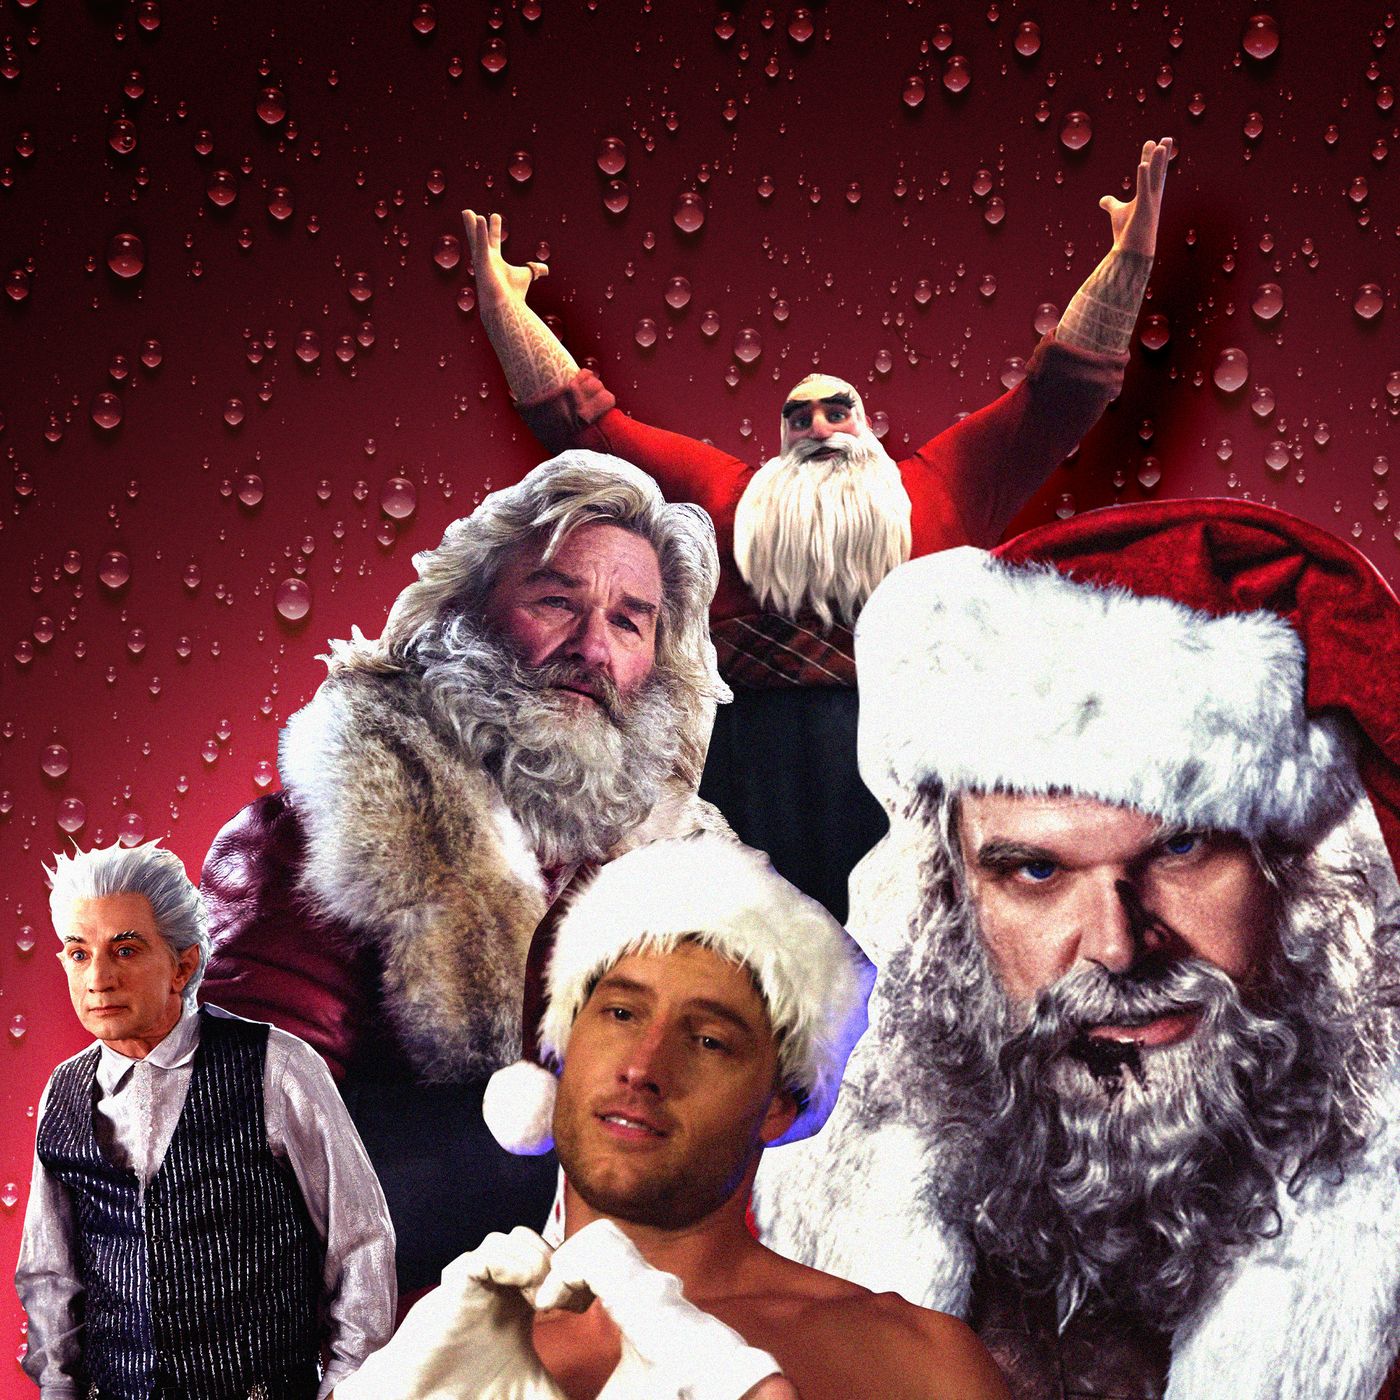 Hotnewsex - The 15 Hottest Hot Santas in Christmas Movies